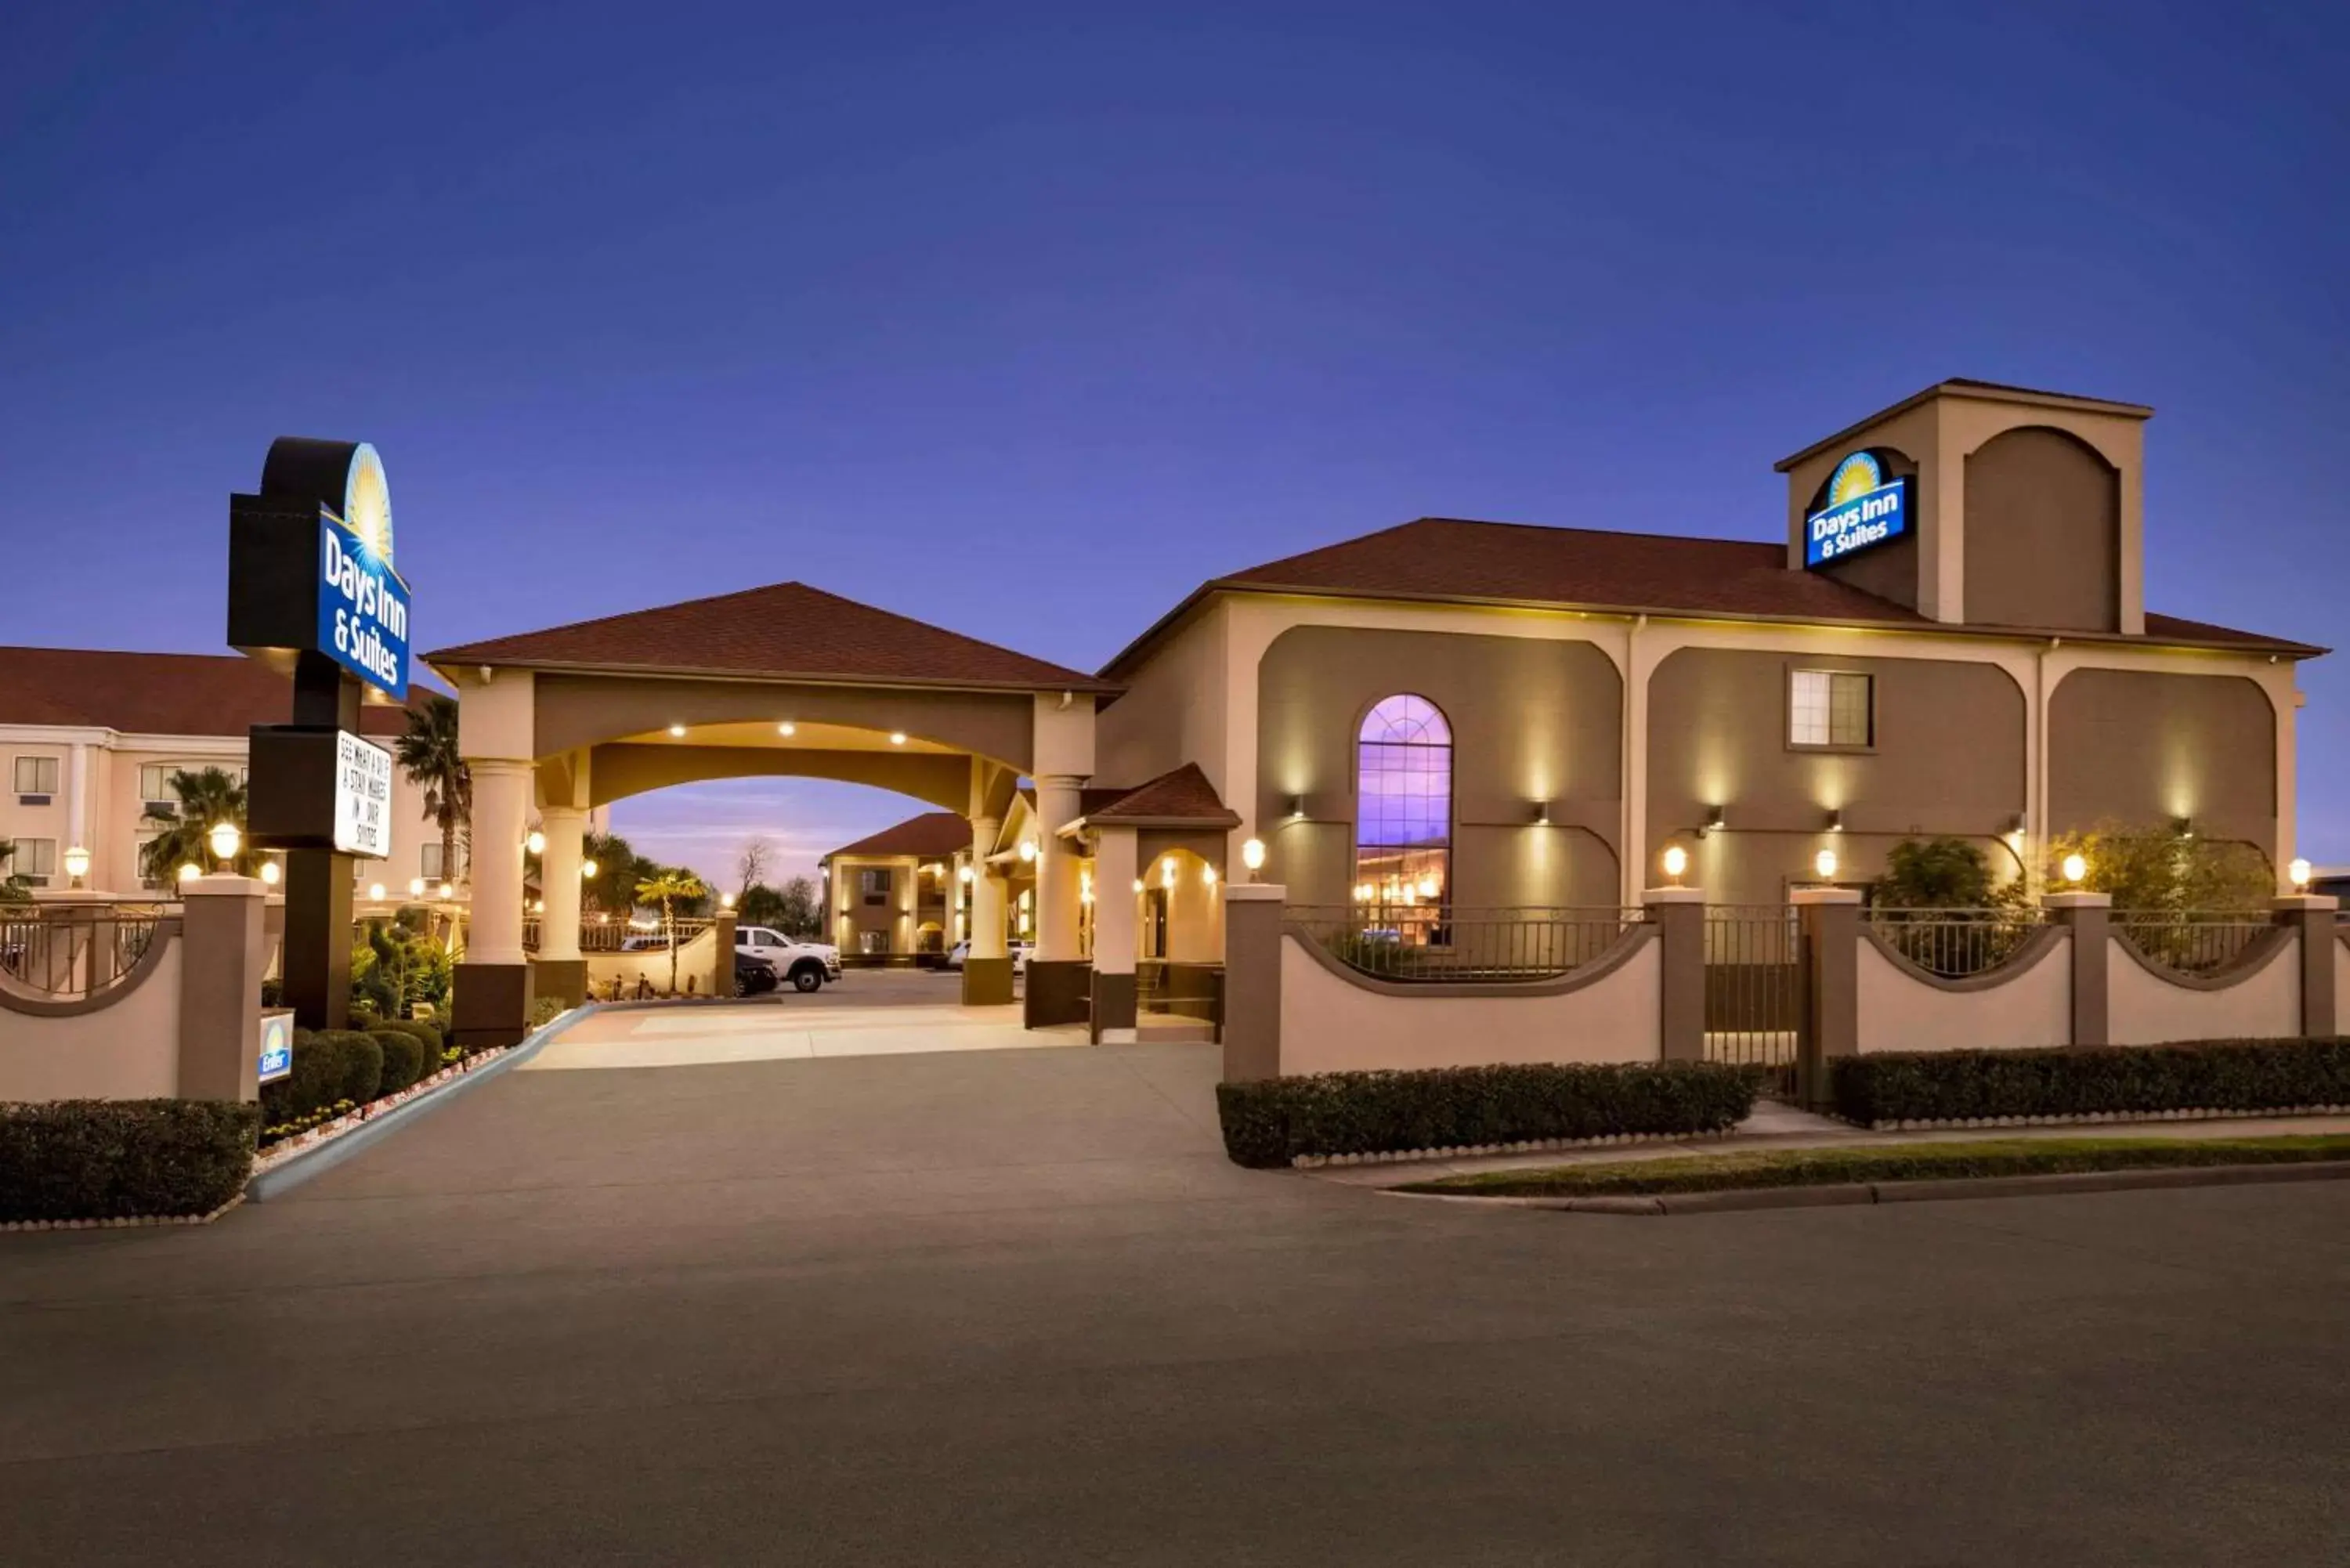 Property Building in Days Inn & Suites by Wyndham Houston Hobby Airport